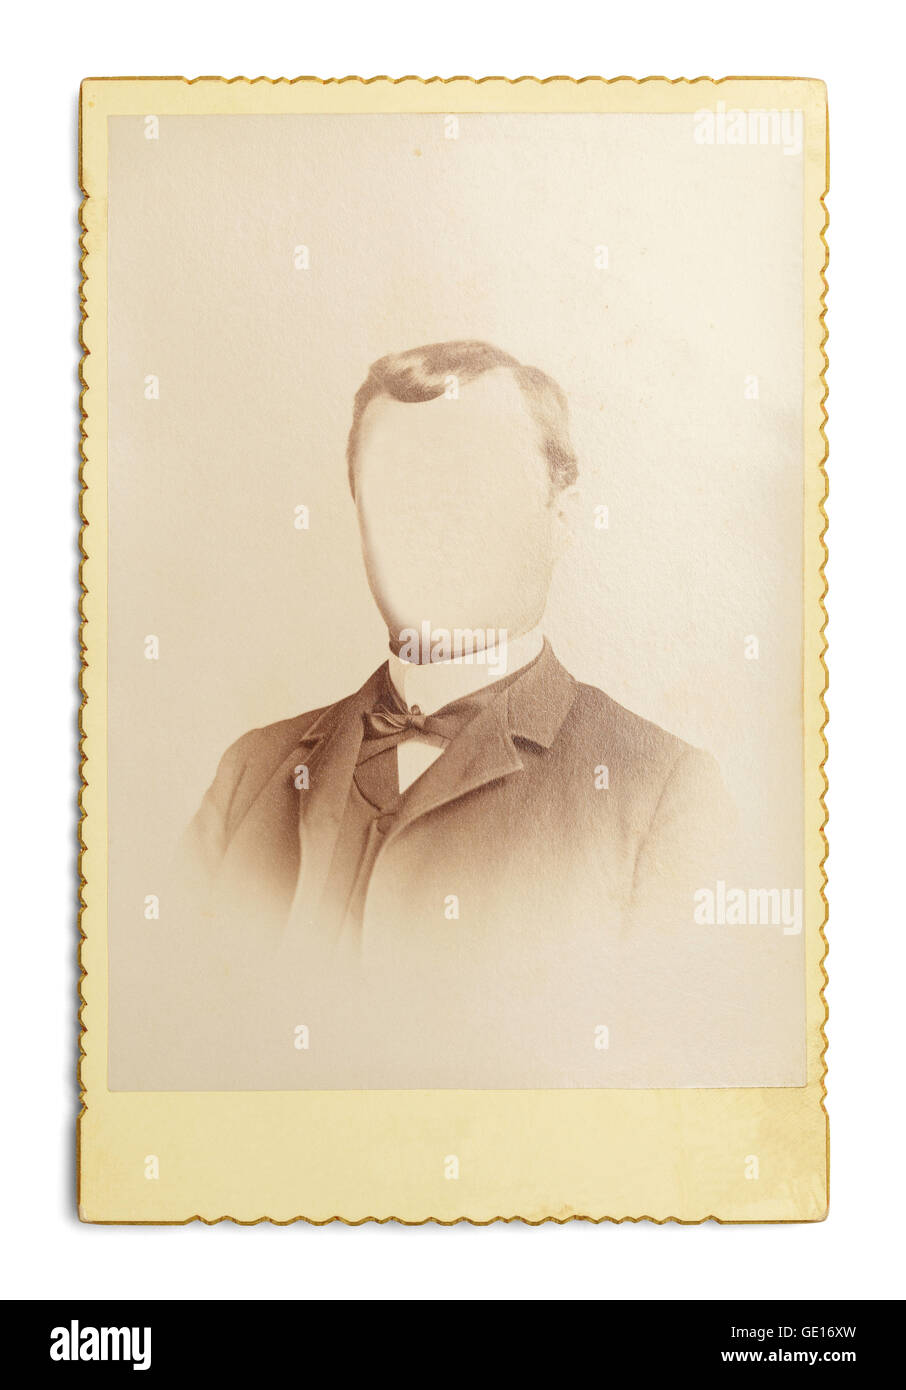 Old Antique Photo of Man With Face Cut Out Isolated on White Background. Stock Photo